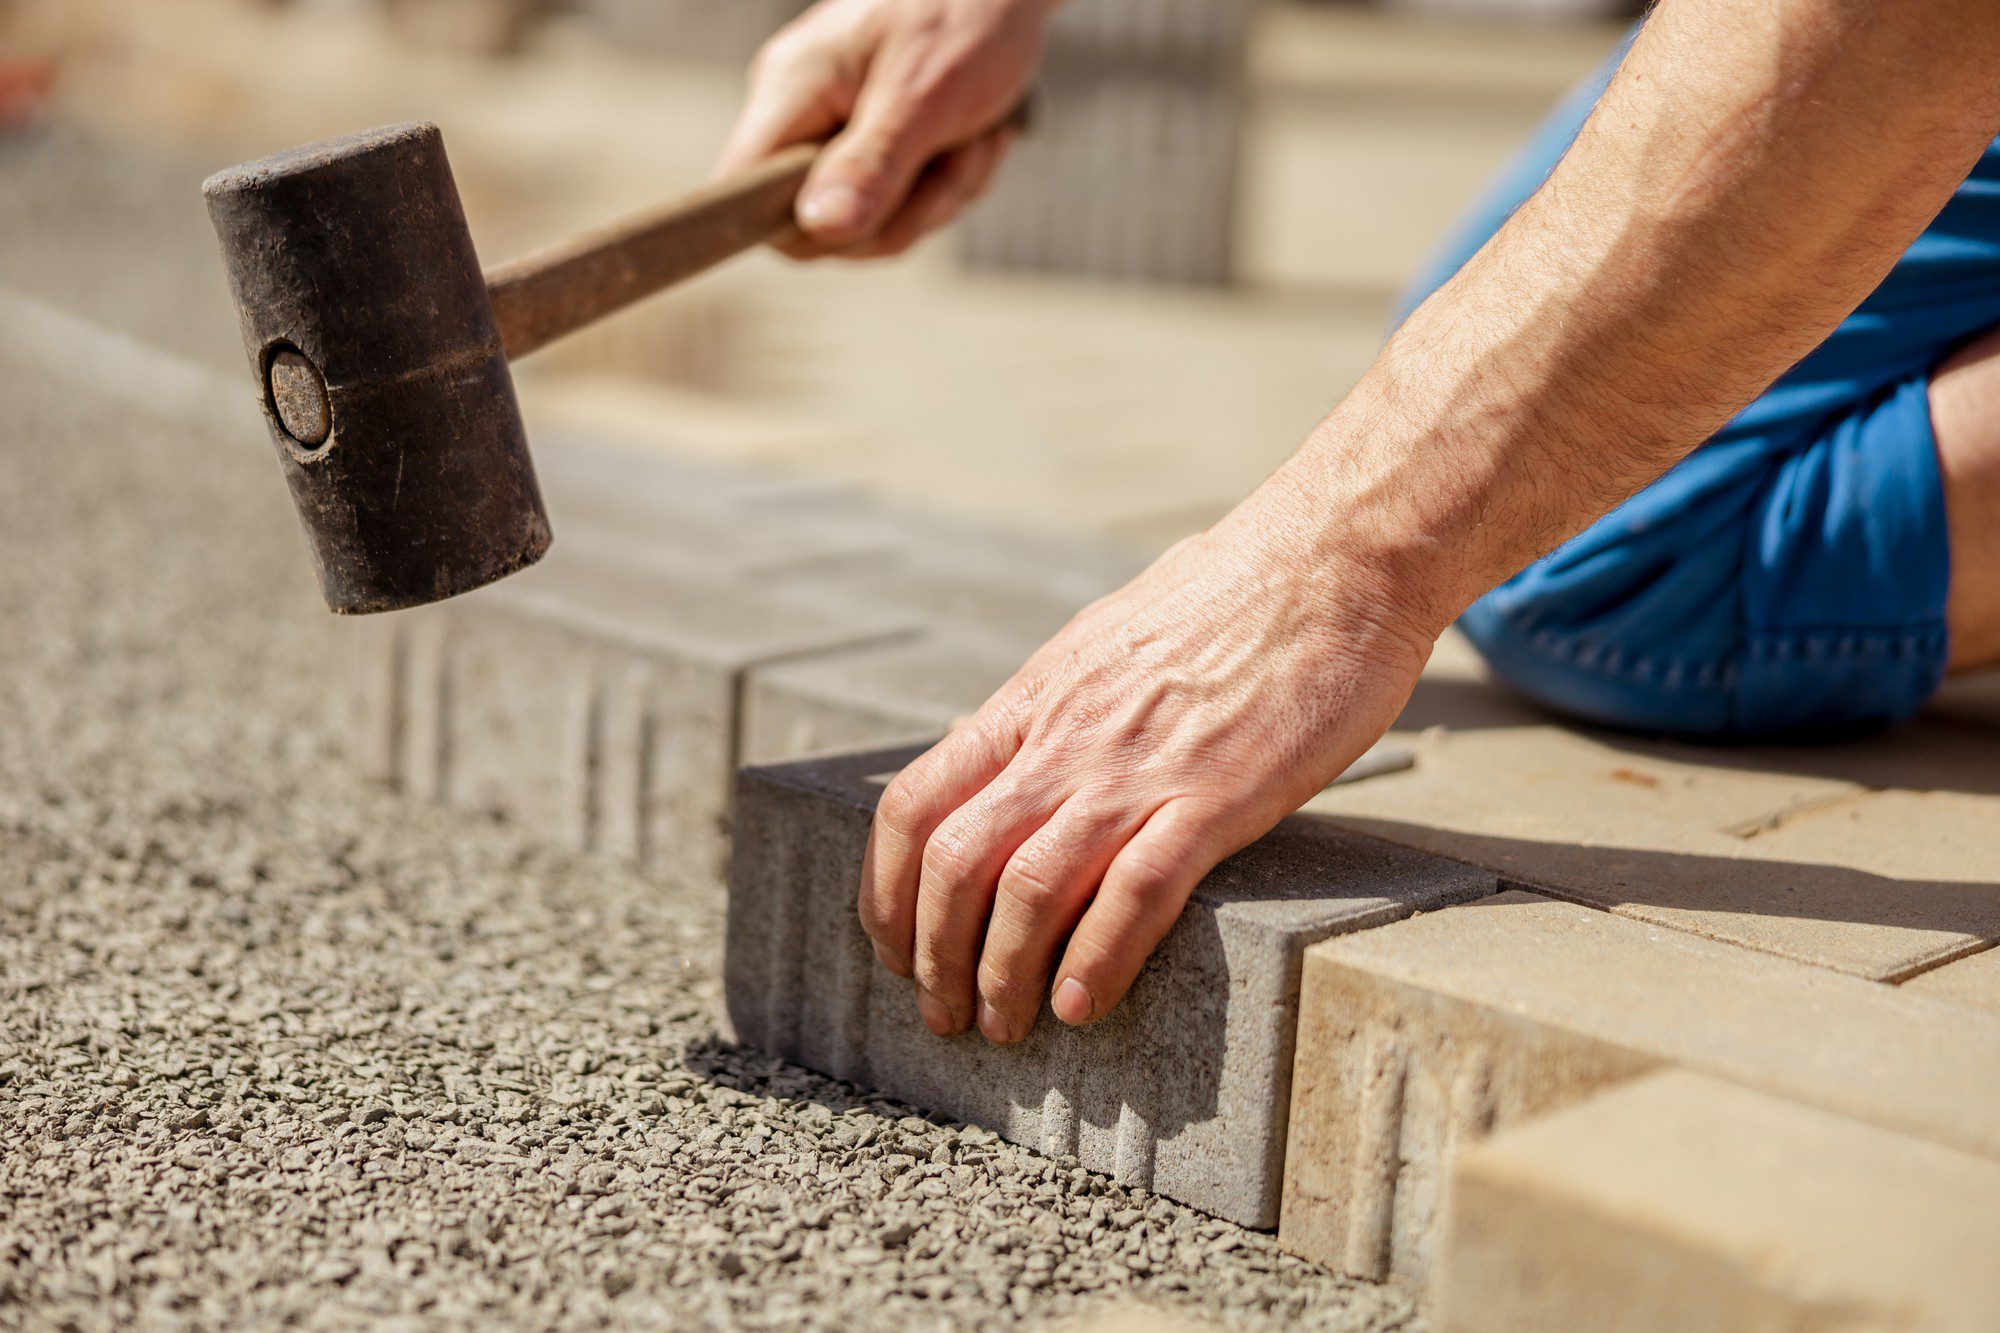 This image shows a person involved in paving work, specifically laying and positioning a concrete or stone paver. The person is using a rubber mallet to tap the paver into place over a prepared base of what appears to be gravel or crushed stone. This is a common method of installing flat, solid surfaces for pathways, patios, or driveways. The person is wearing casual clothing, suggesting the work may be a personal DIY project or casual labour. You can see their hands, a snippet of blue attire they are wearing, and the rubber mallet in action.